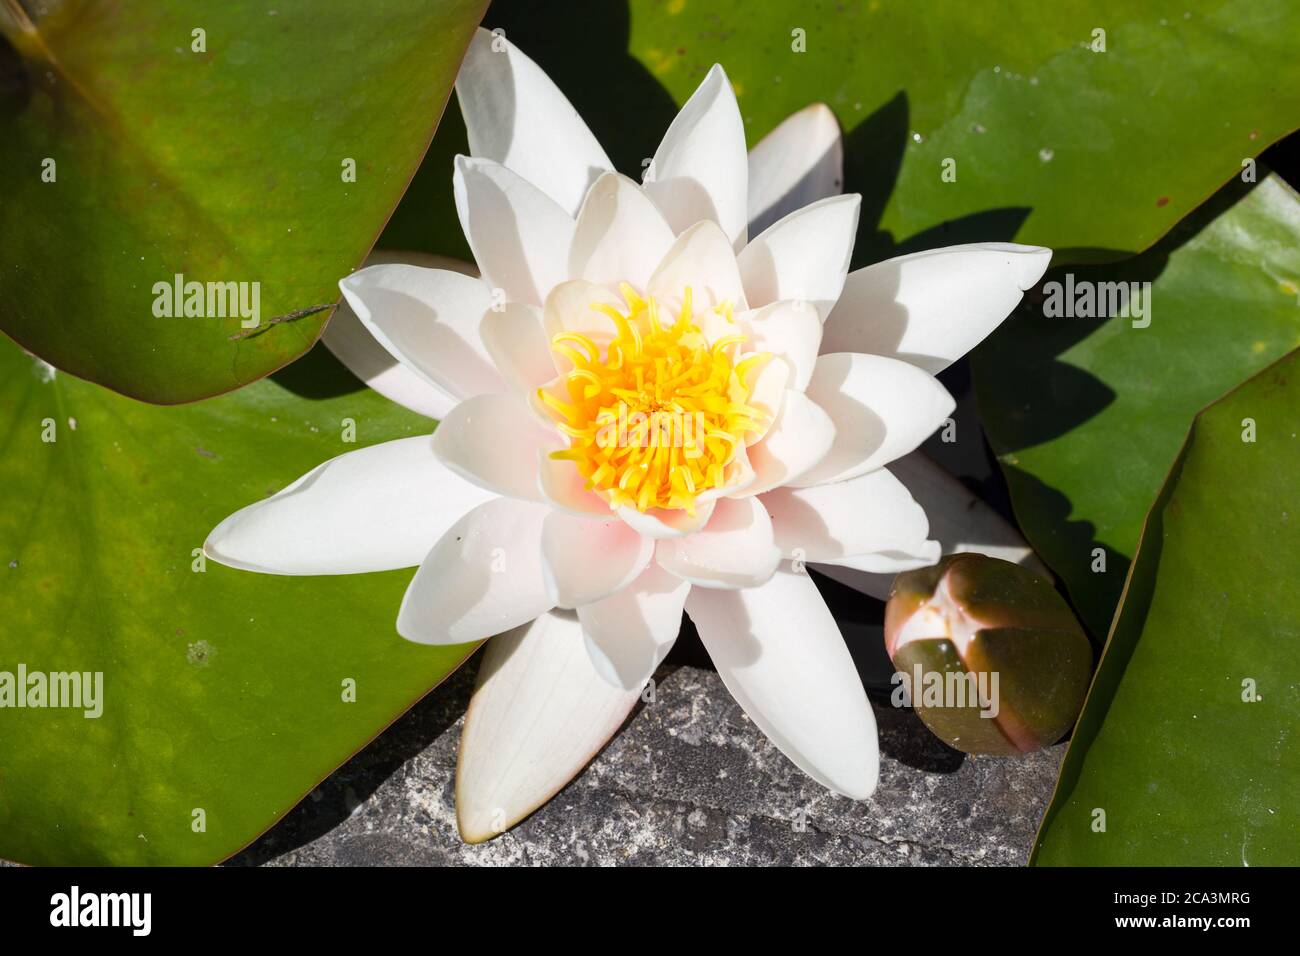 Close up of a water lily with white petals and yellow flower pistils. Latin name Nymphaea hybride Marliacea Rosea. Stock Photo